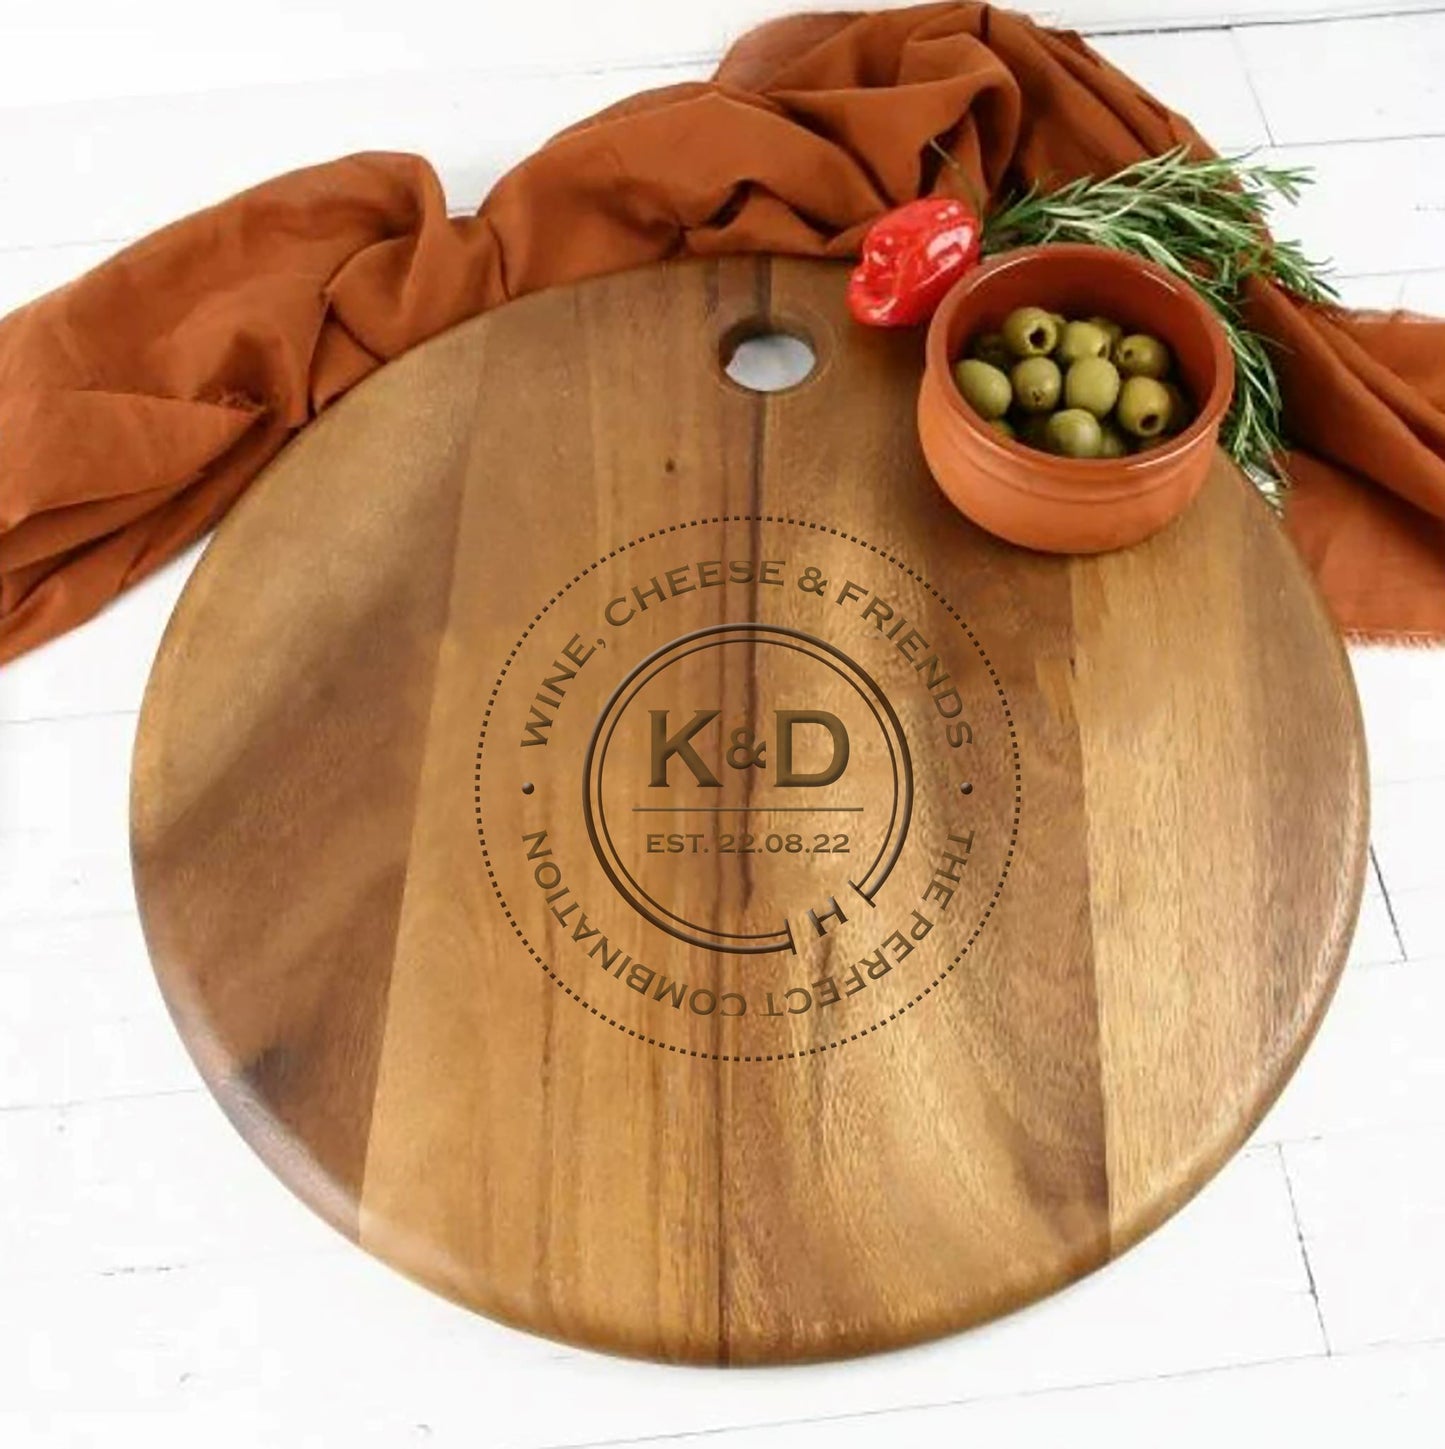 The Tilba Cheese Board - Round Deluxe